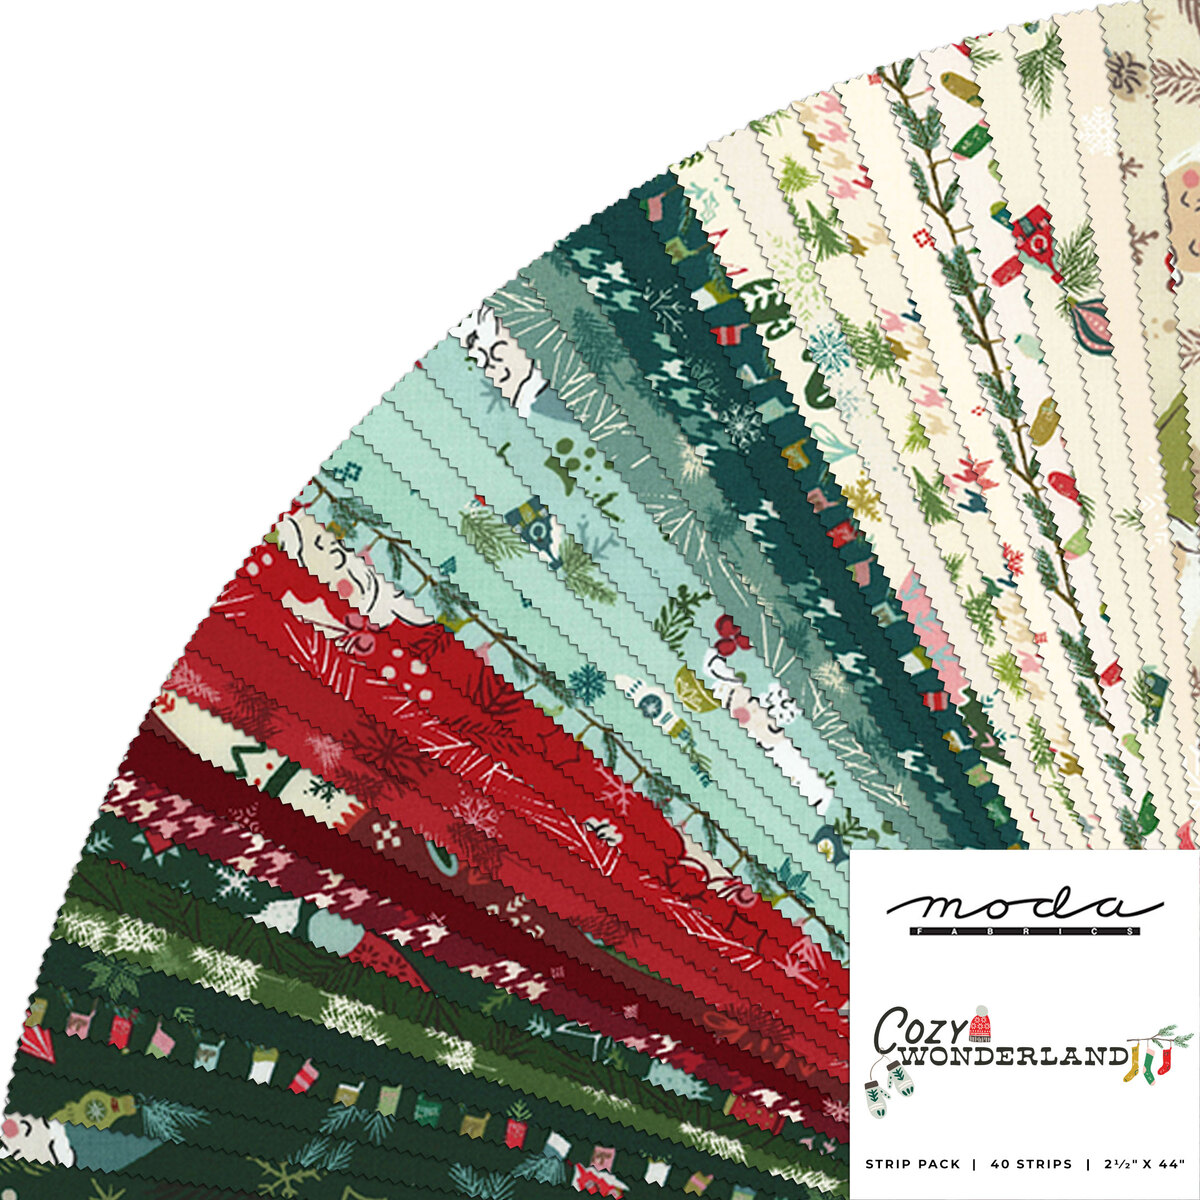 Christmas Jelly Roll Fabric Sale, Cotton Fabric Jelly Rolls